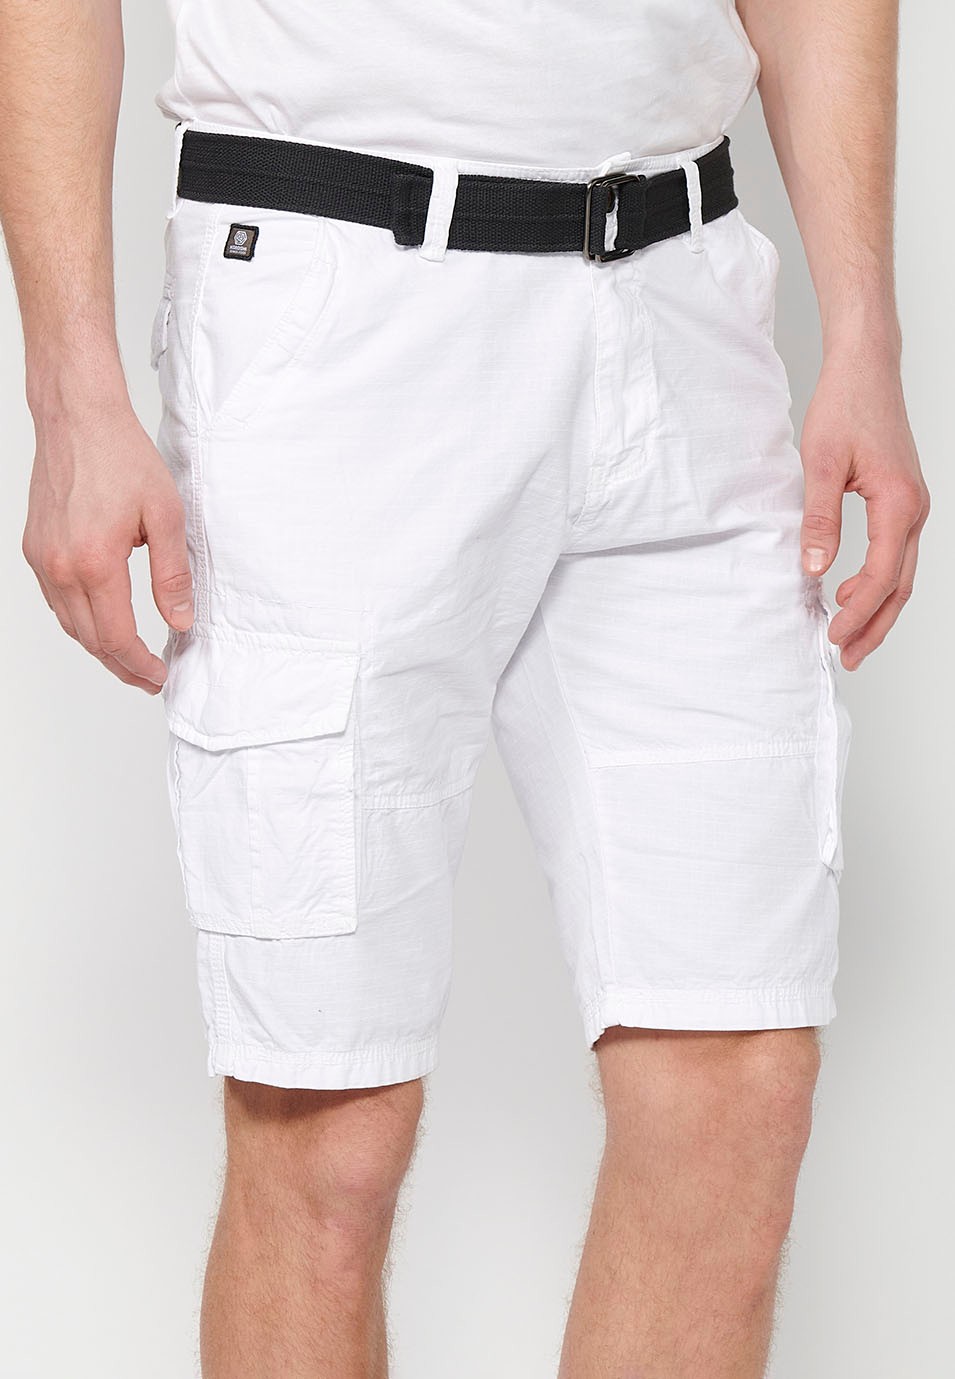 Cotton cargo shorts with belt and front closure with zipper and button with pockets, two back pockets with flap and two cargo pants in White for Men 2